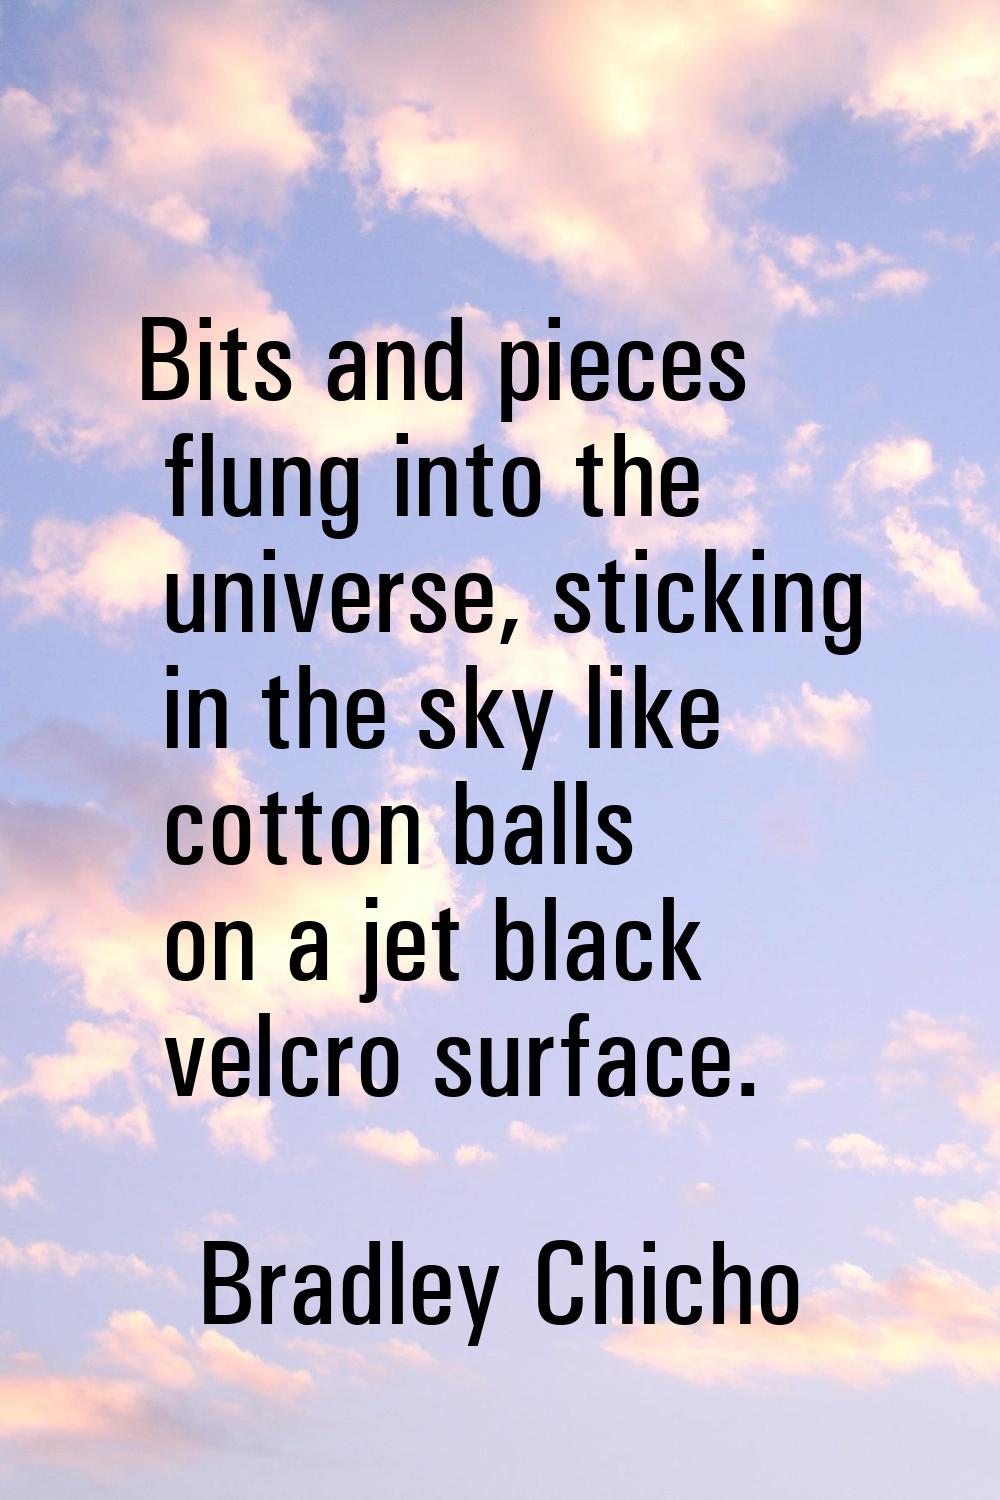 Bits and pieces flung into the universe, sticking in the sky like cotton balls on a jet black velcr